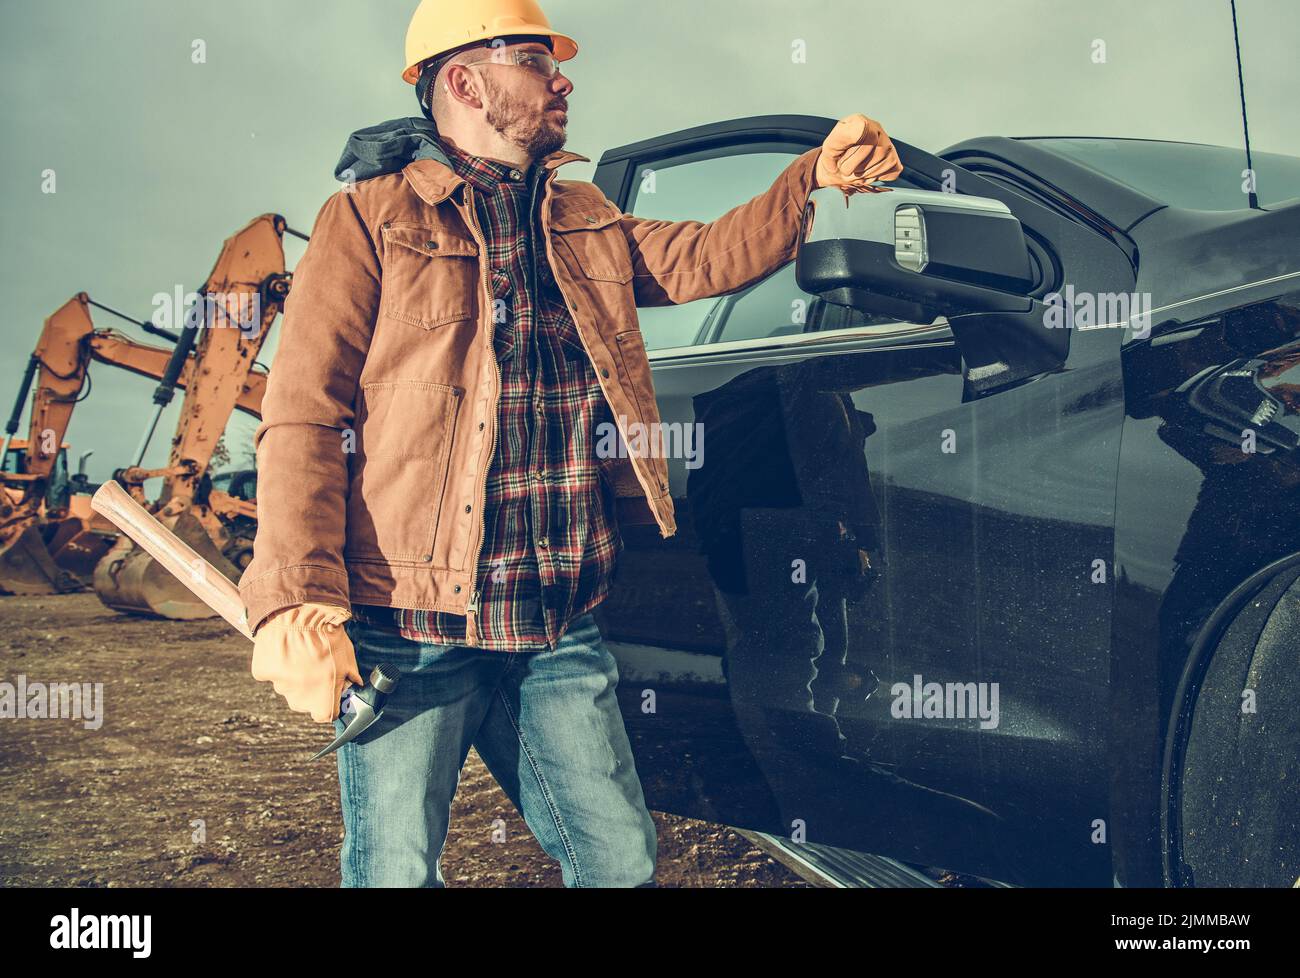 Proud Heavy Duty Construction Worker Standing Next to Black Pickup Truck With Excavators In the Background. Feeling of Satisfaction After Well Done Ha Stock Photo